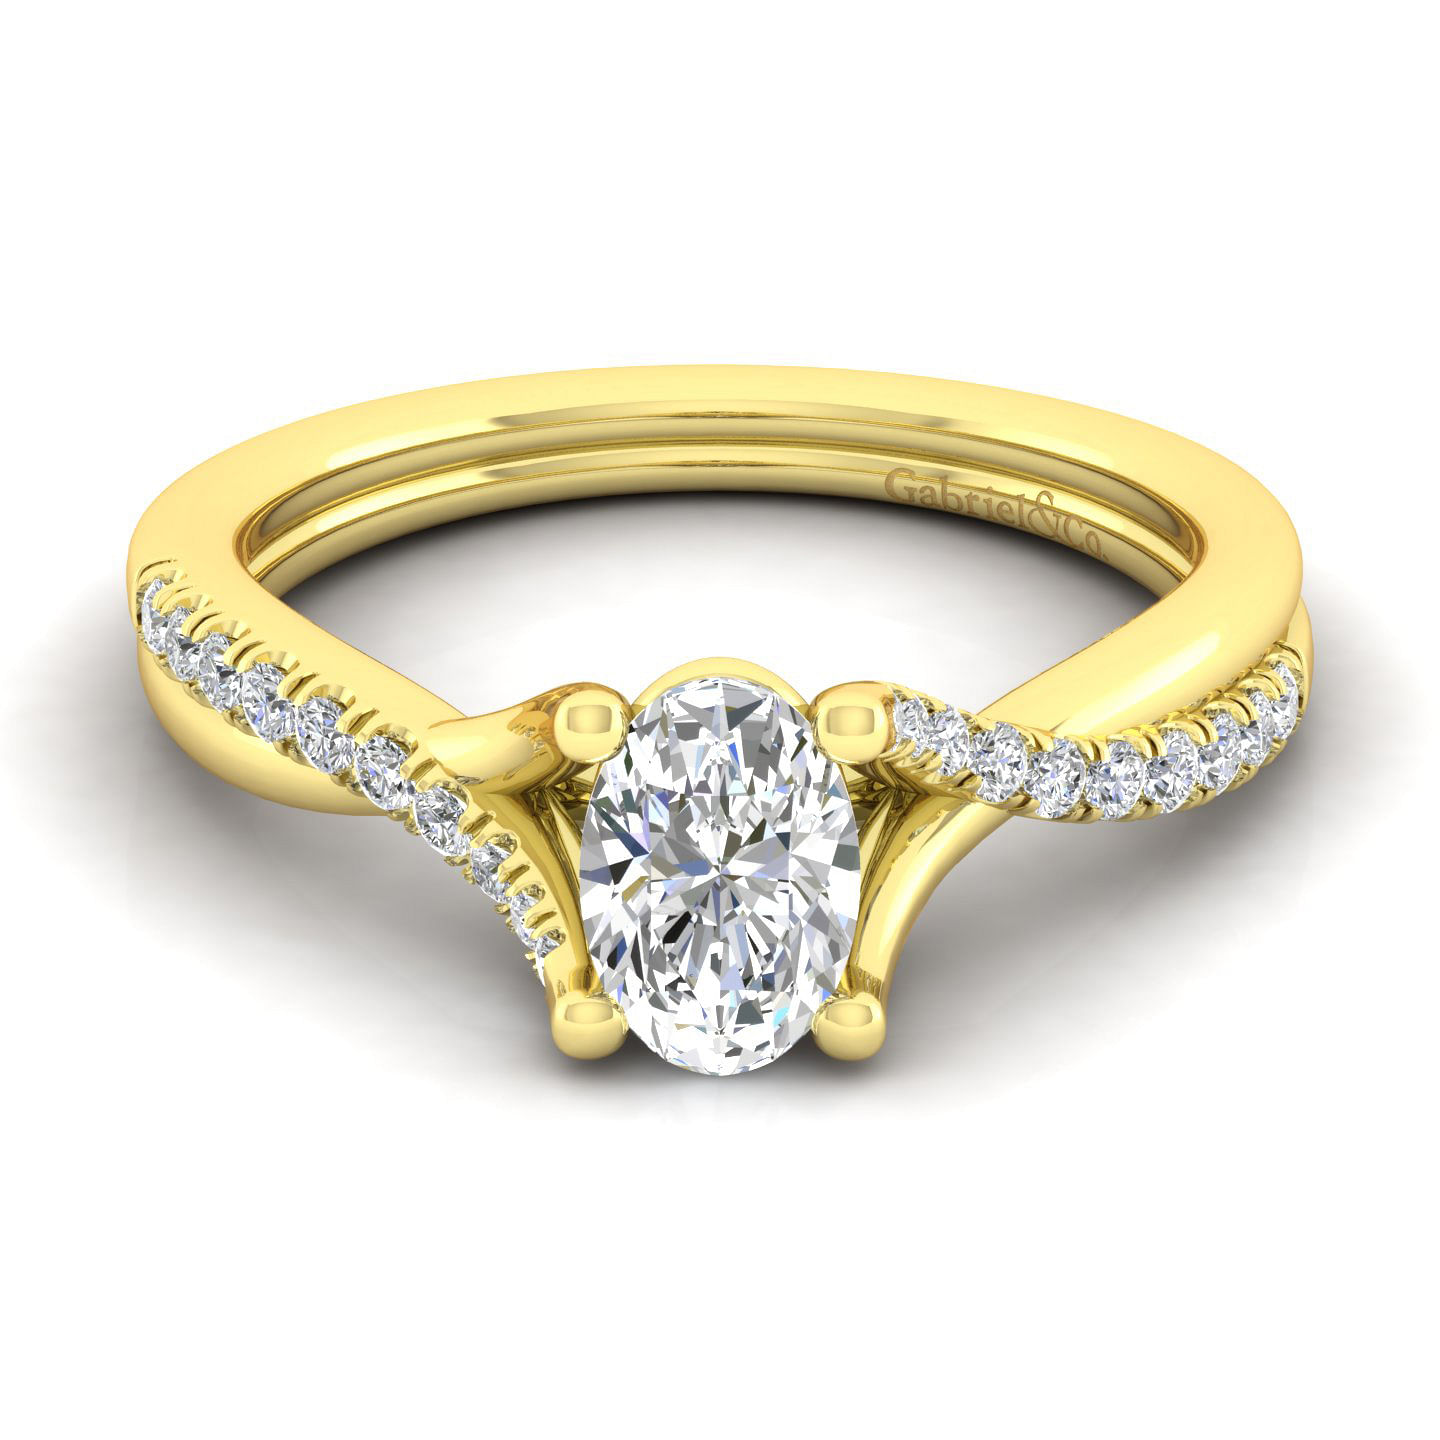 Leigh---14K-Yellow-Gold-Oval-Diamond-Engagement-Ring1